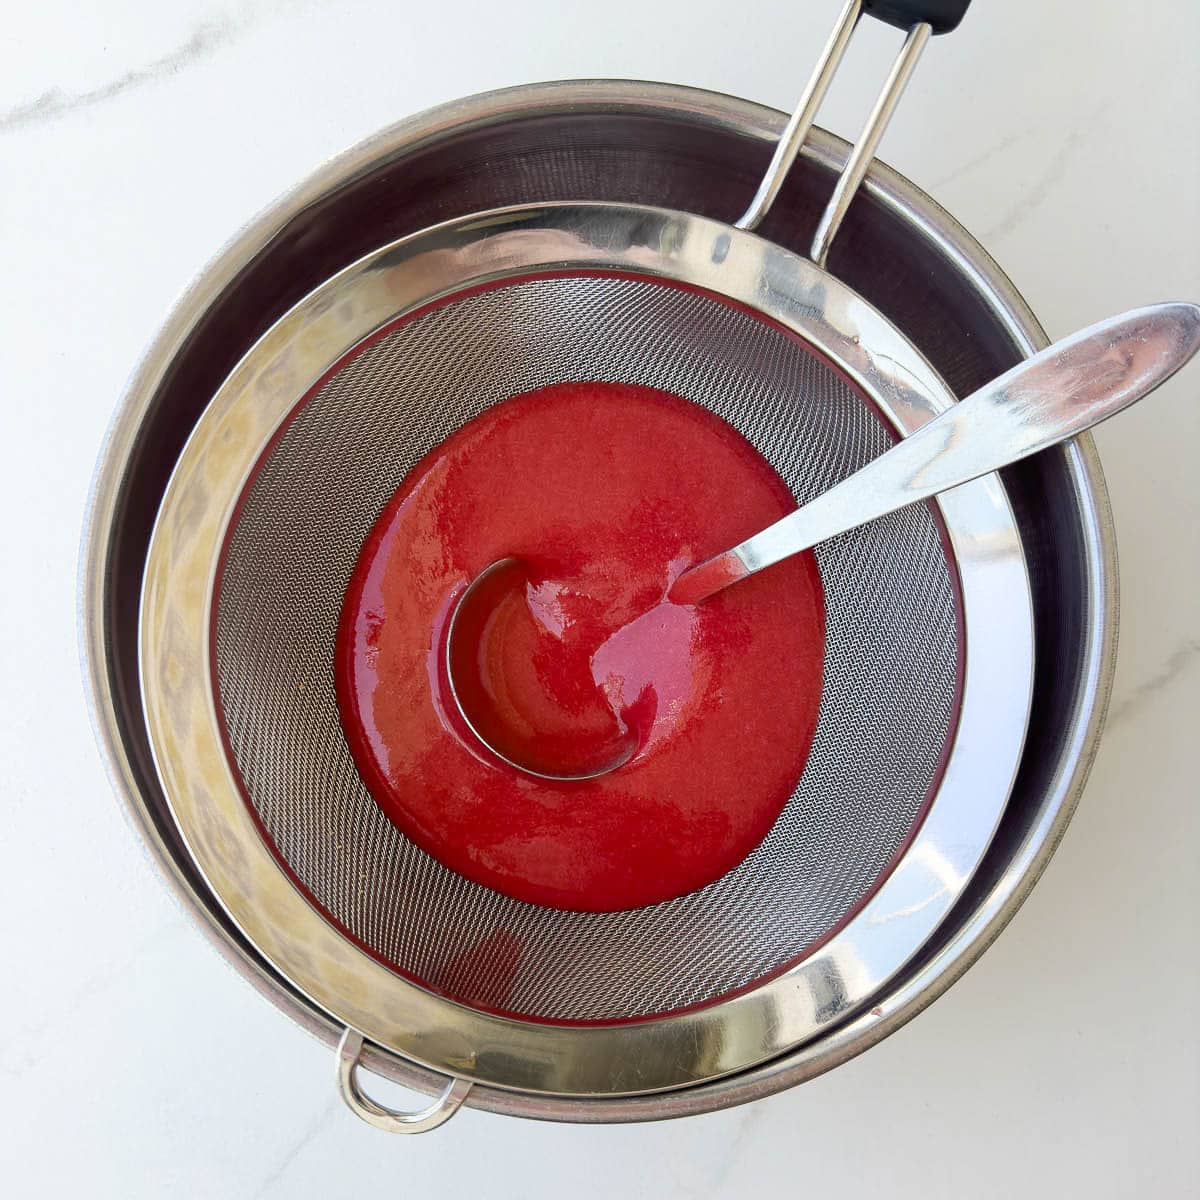 Straining strawberry puree through a fine sieve to remove seeds with a ladle.